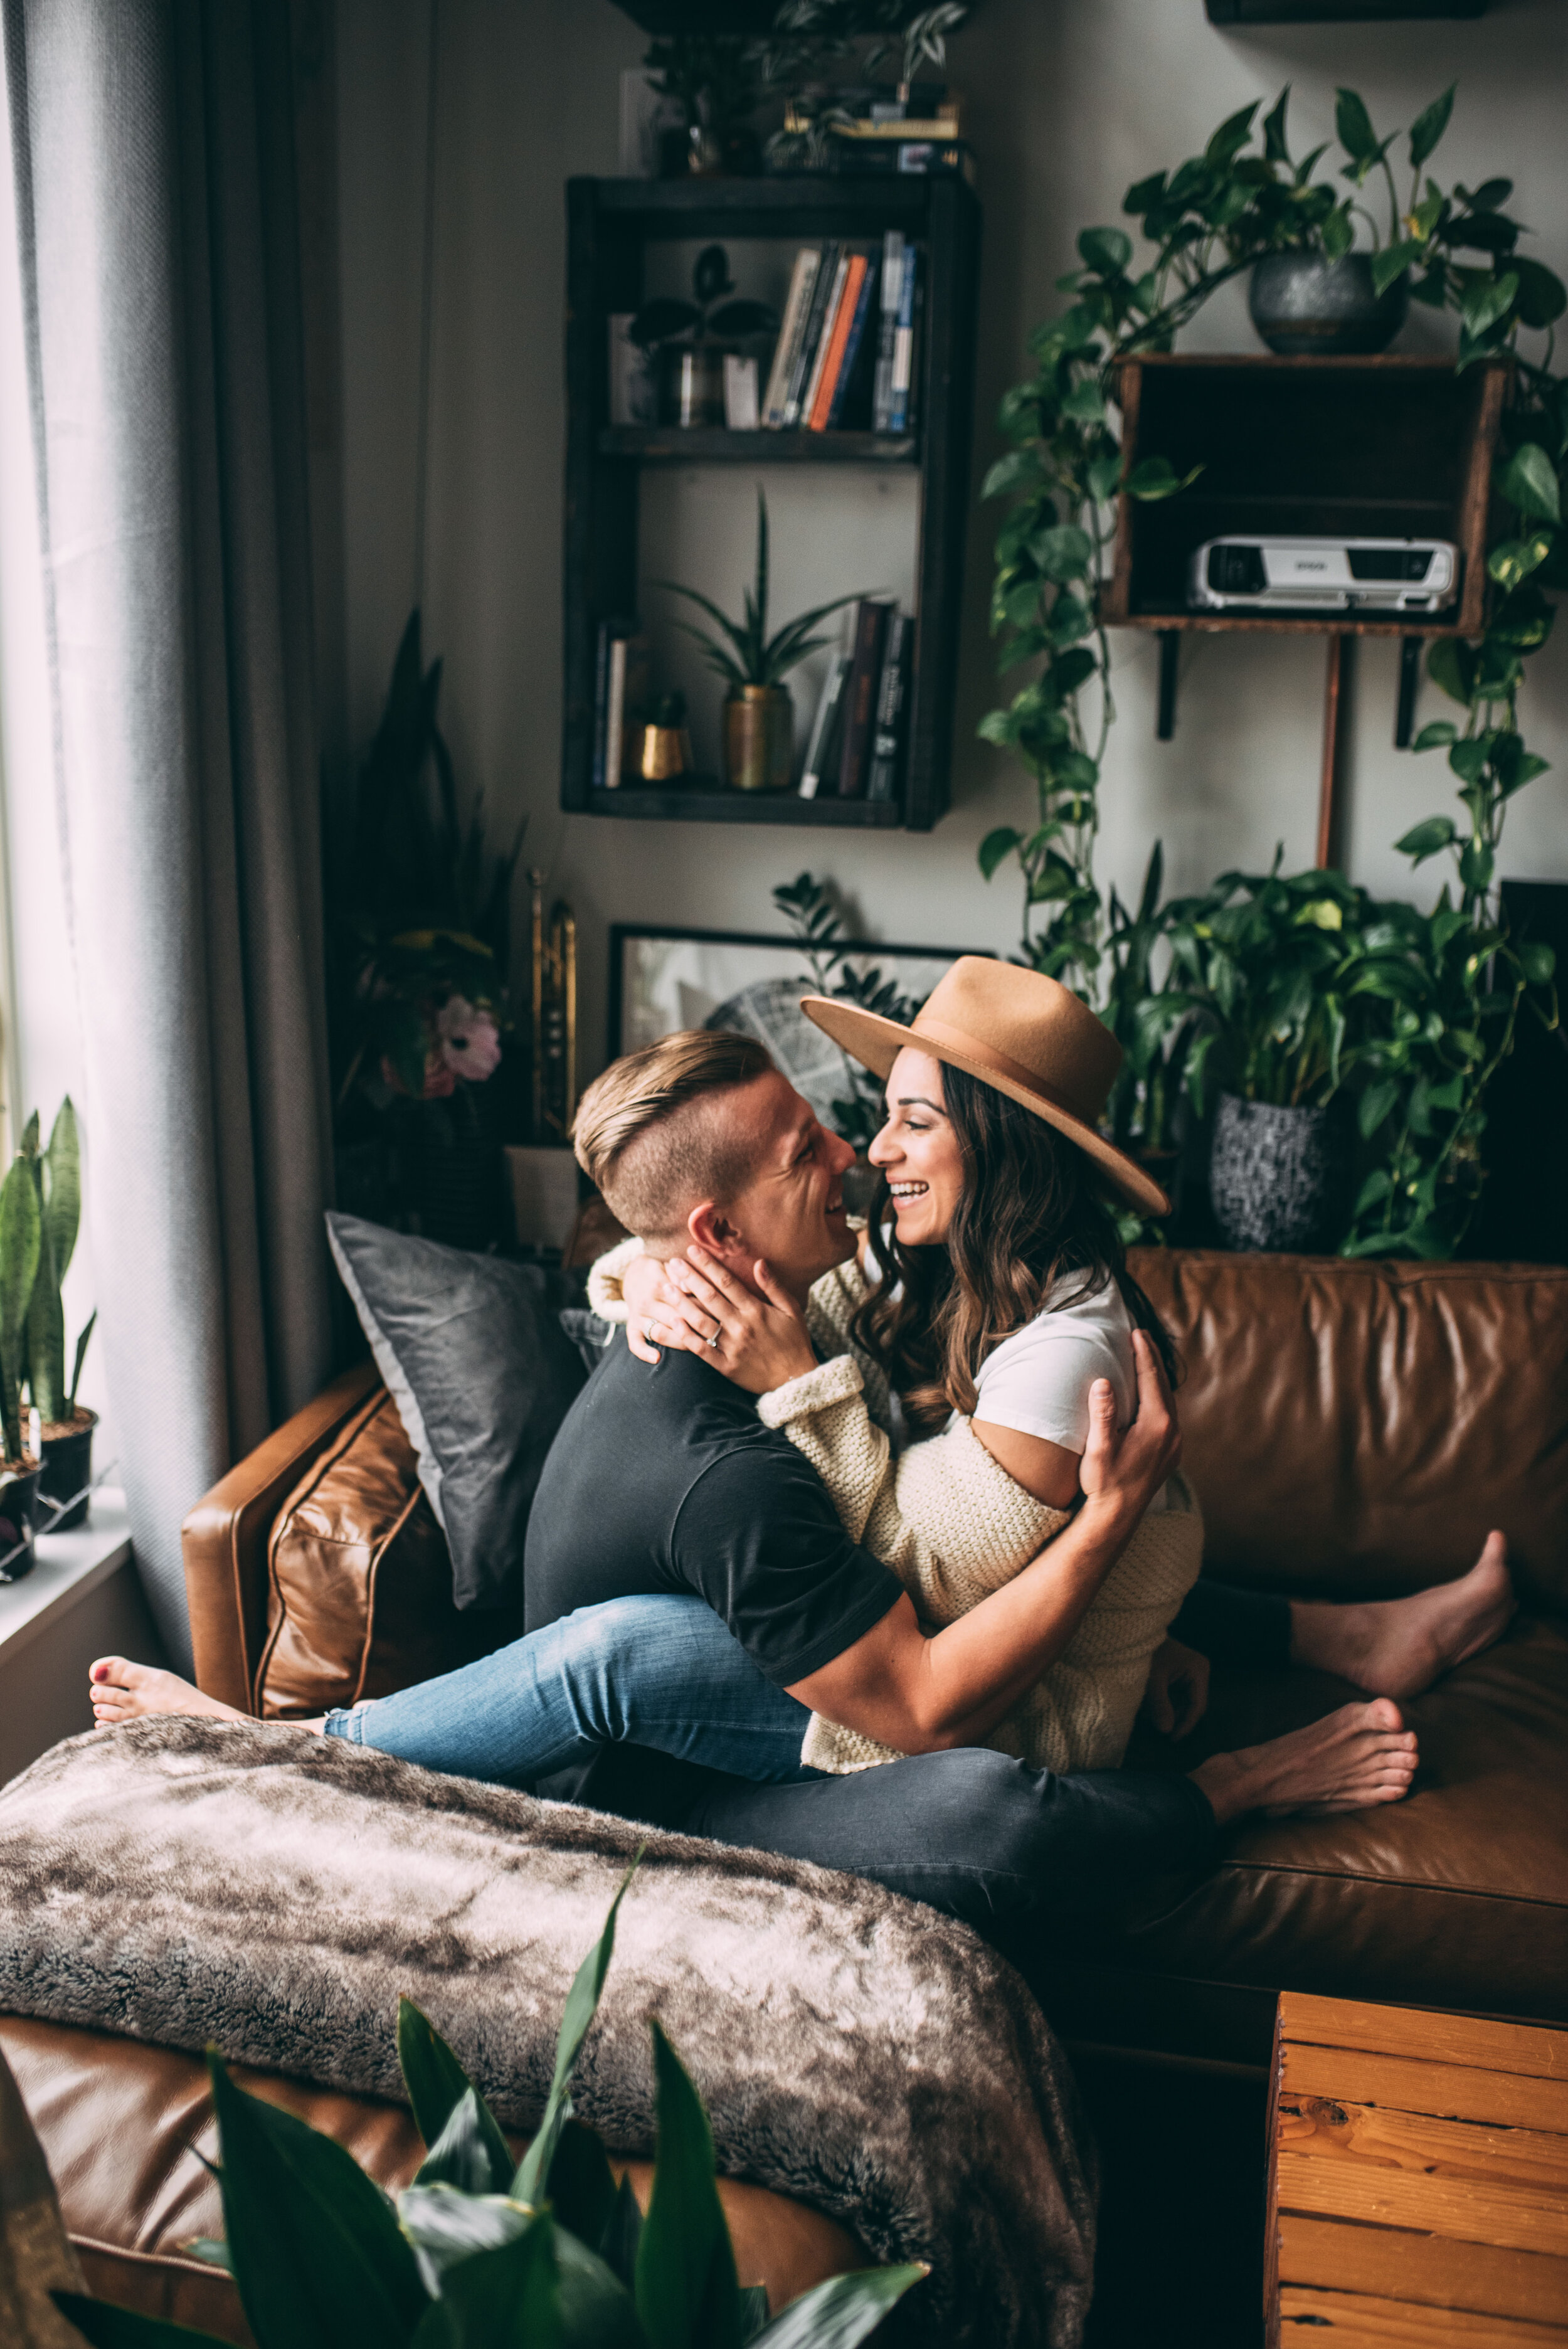 Vancouver Engagement Session - In Home Couples Session - Loft Garden Oasis - Laura Olson Photography - Sunshine Coast BC & Vancouver Wedding & Elopement Photographer7923.jpg